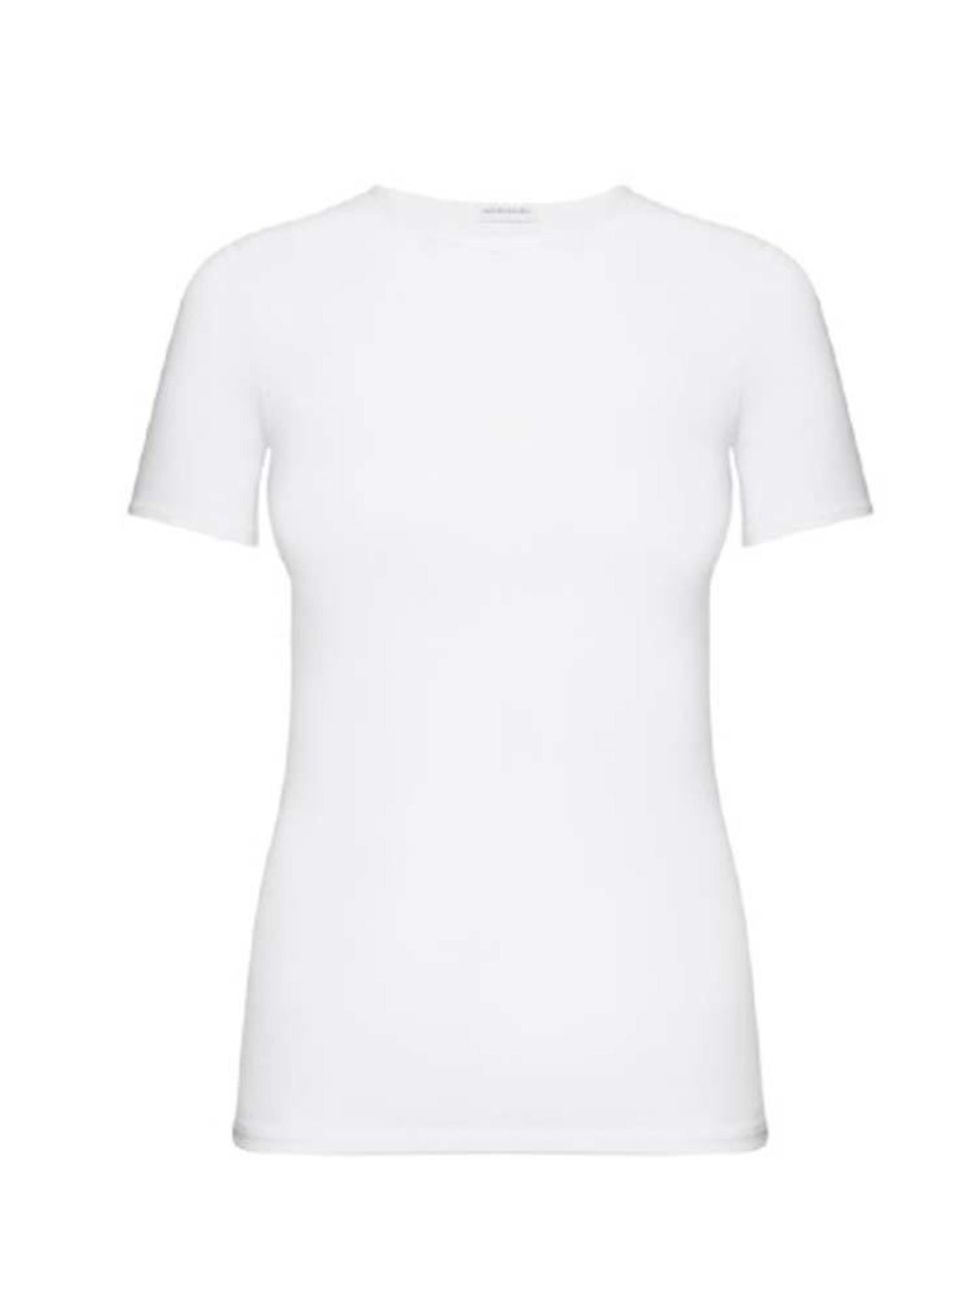 <p>Pair the skirt with a simple white Tee like this from <a href="http://uk.intimissimi.com/product/micromodal-crew-neck-t-shirt/156244.uts" target="_blank">Intimissimi</a>, &pound;17</p>